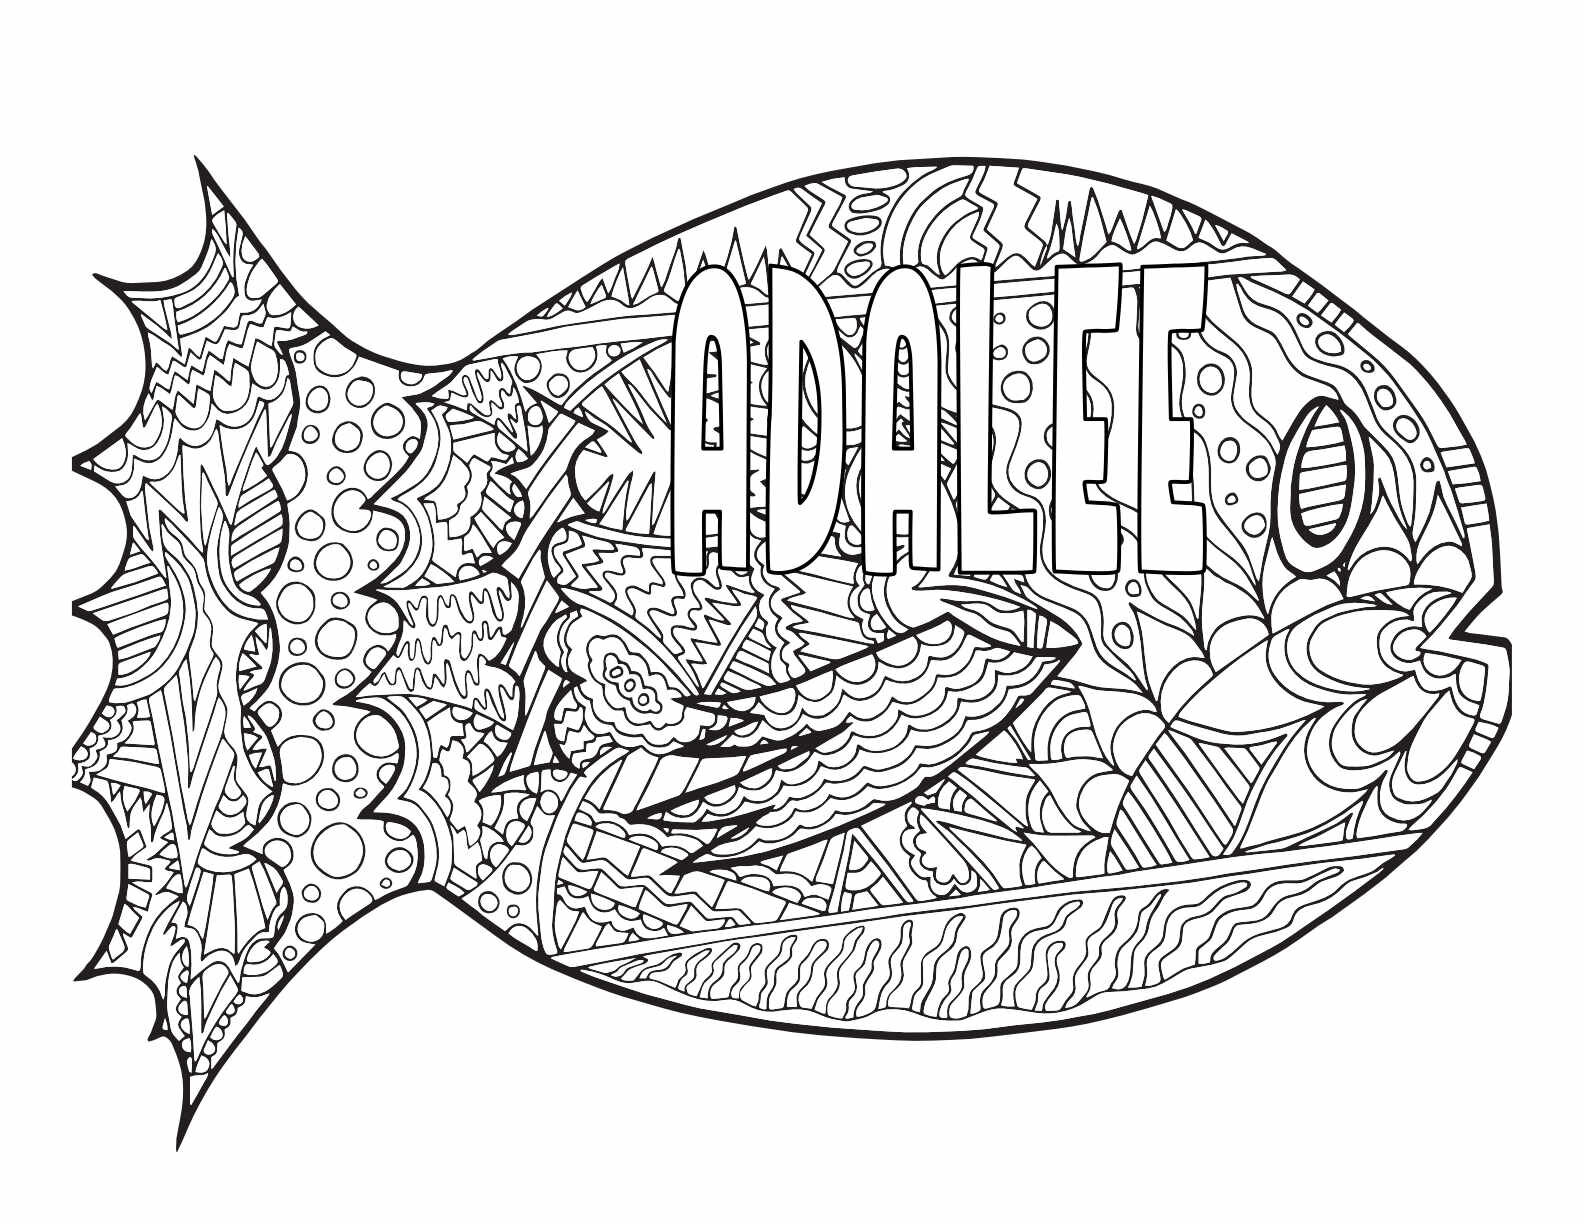 ABSALOM Free Name Coloring Page — Stevie Doodles